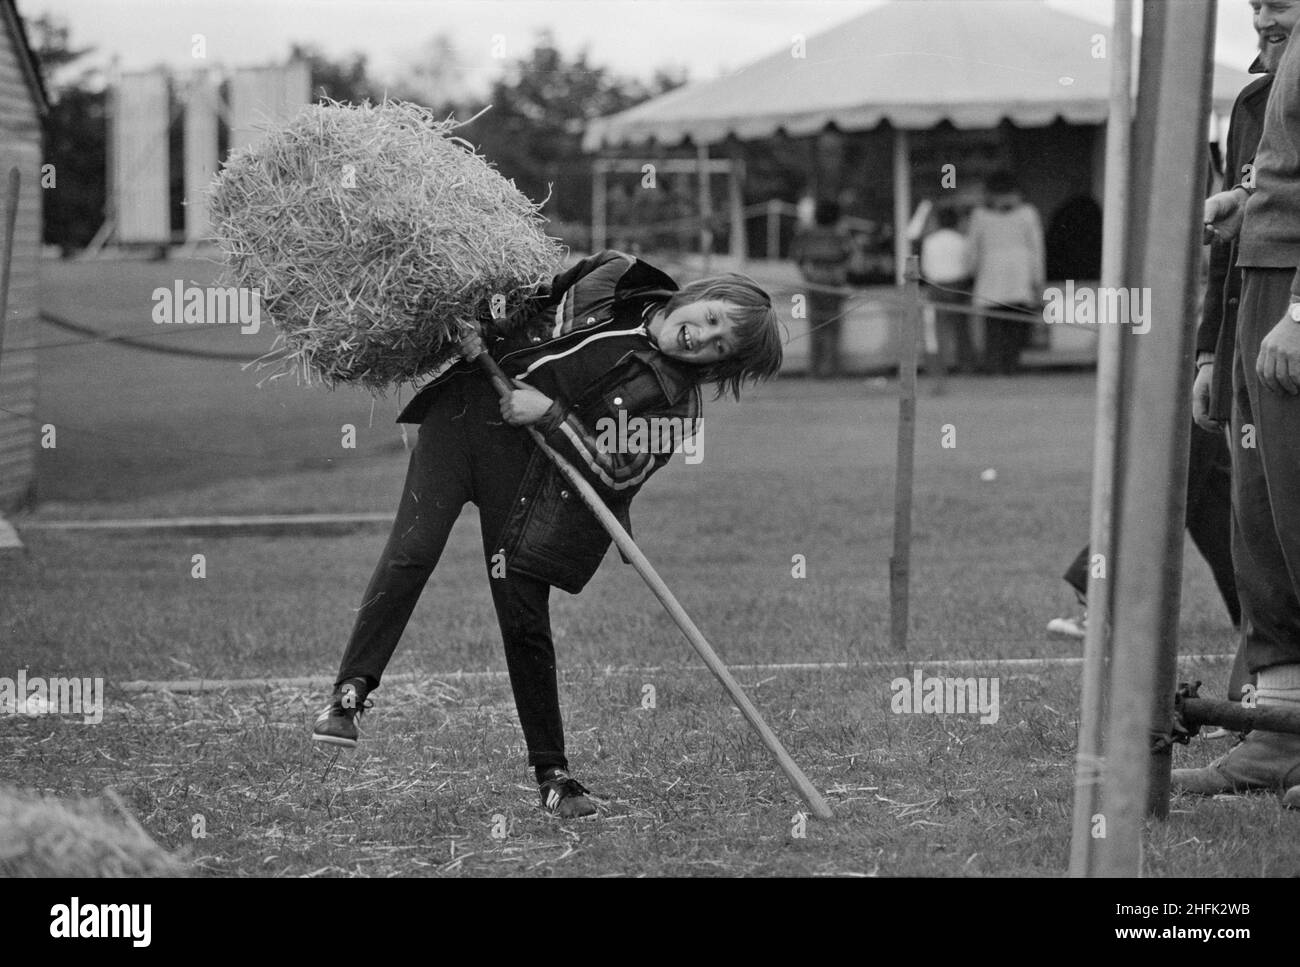 Laing Sports Ground, Rowley Lane, Elstree, Barnet, London, 18/06/1977. A child taking part in a hay bale tossing contest during the Jubilee Gala Day held at the Laing Sports Ground. Stock Photo